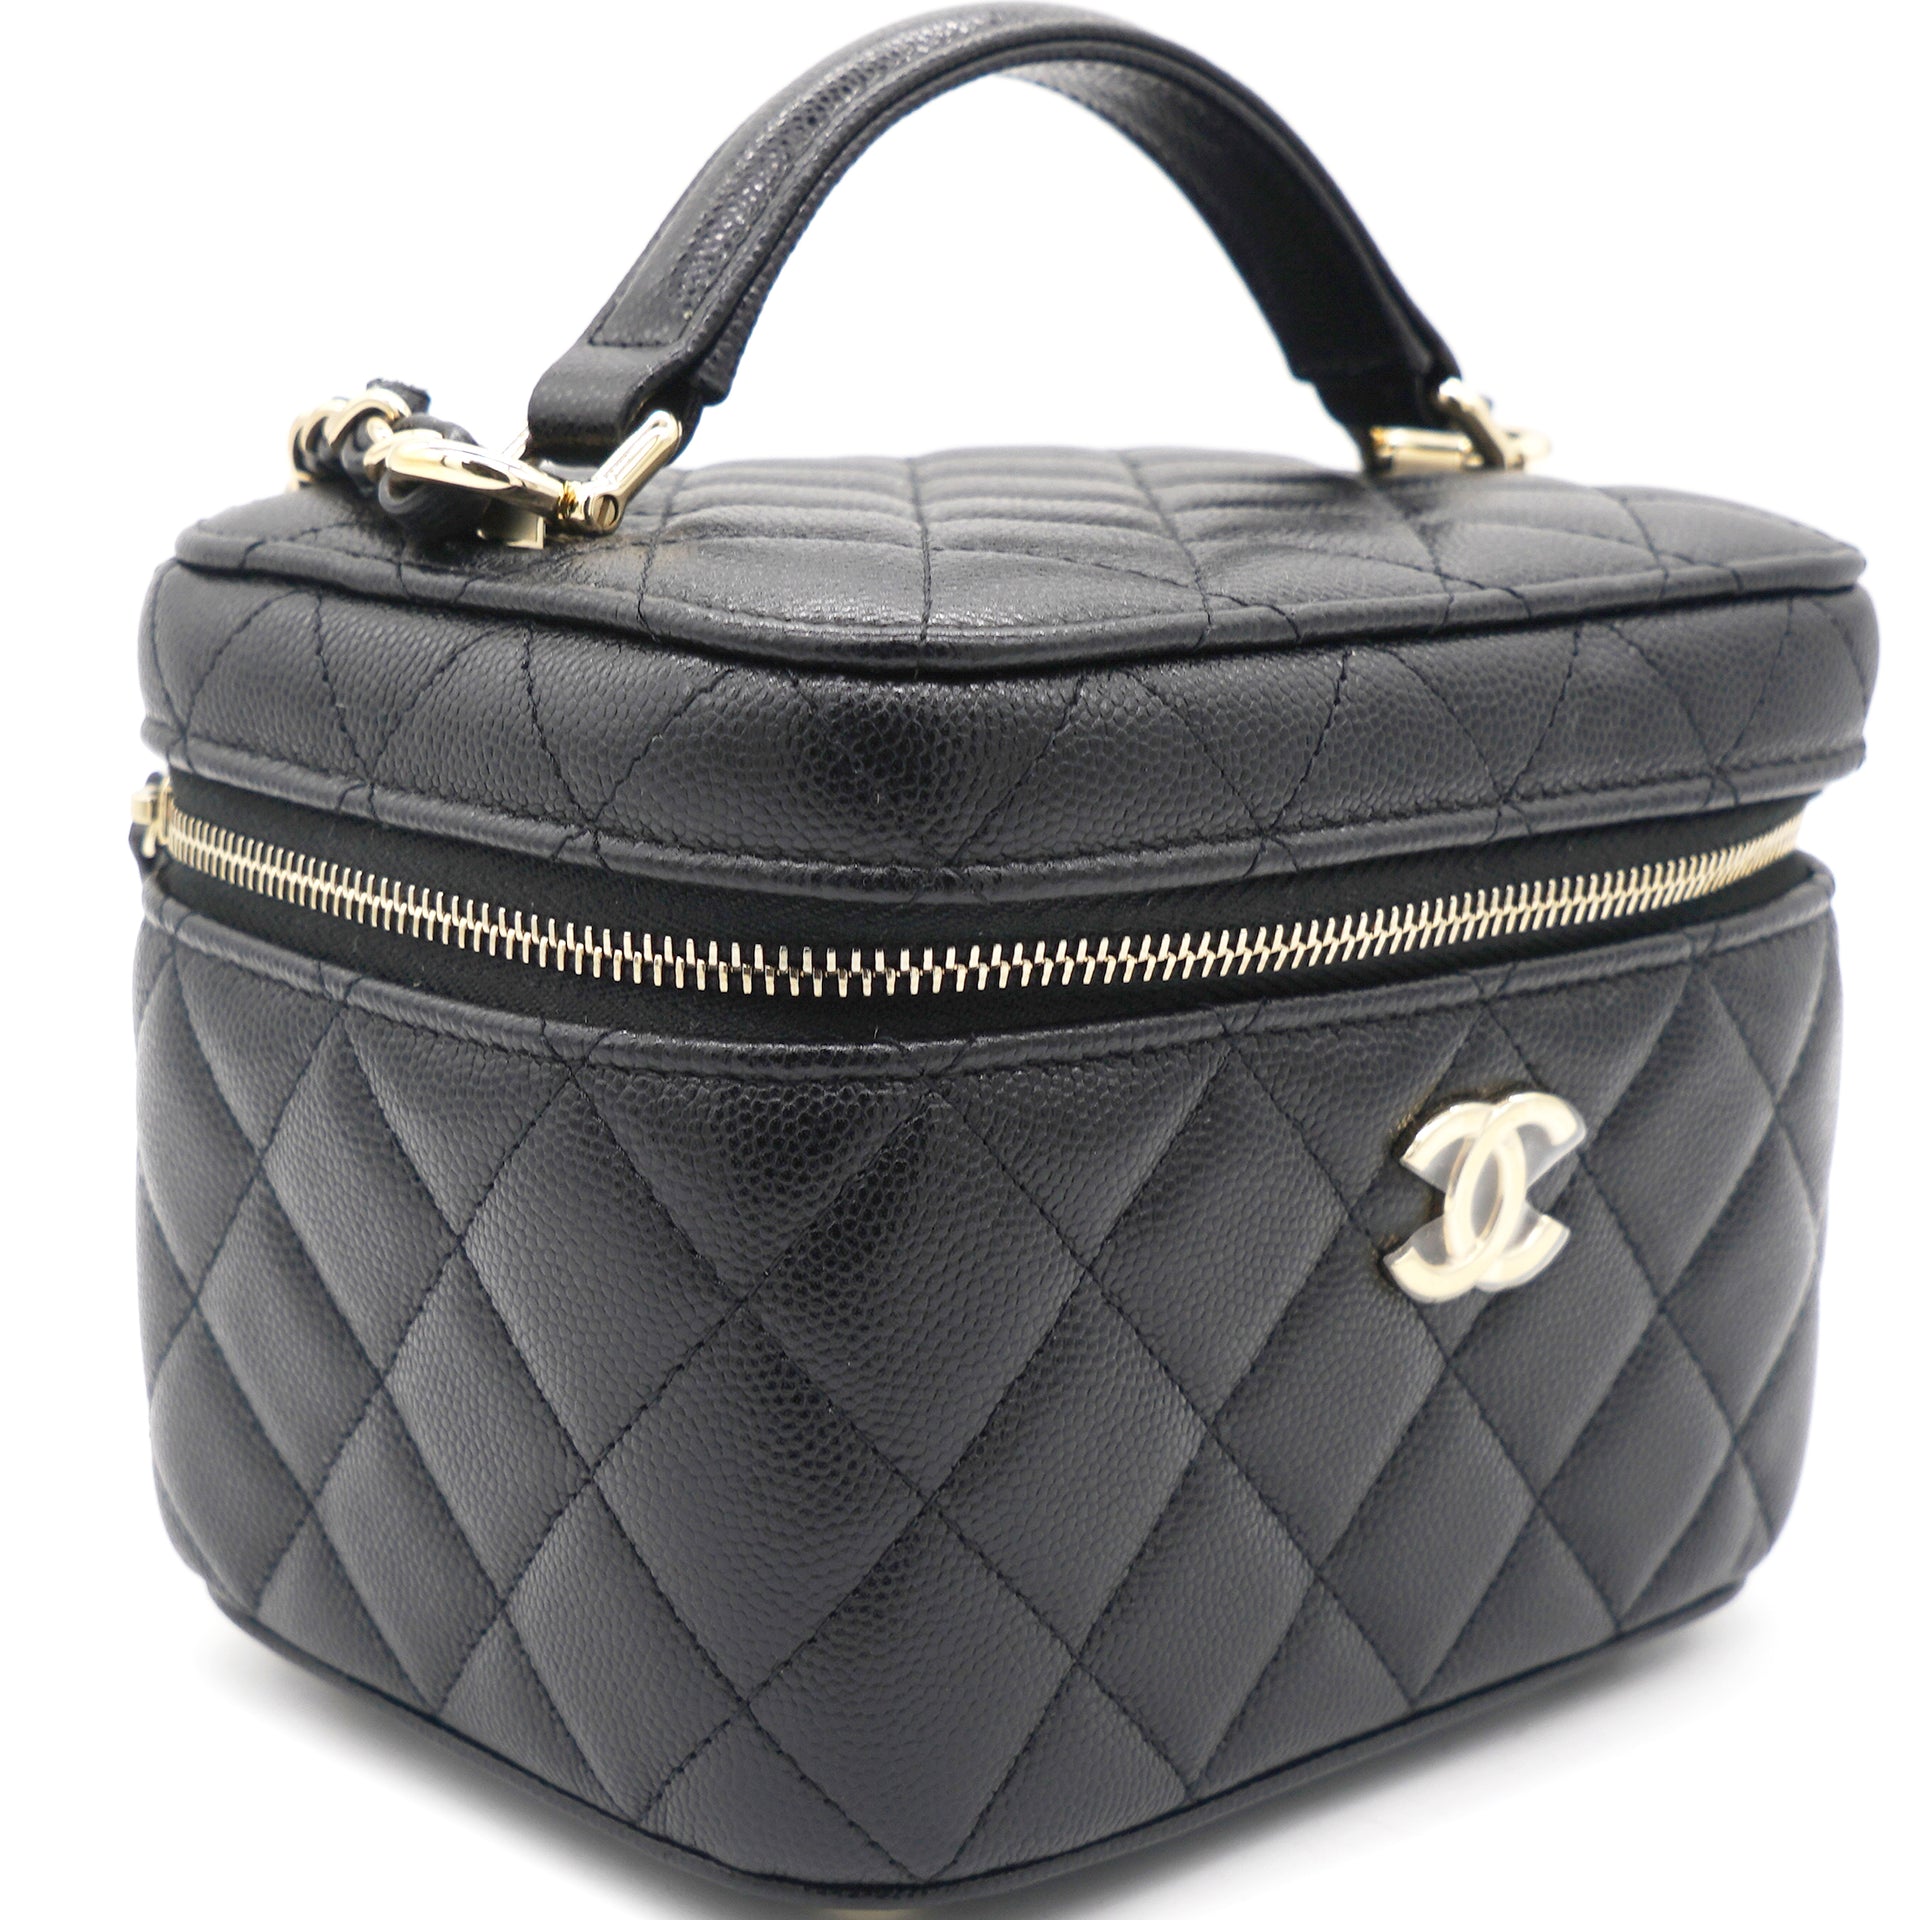 Black Caviar Quilted Leather Vanity Case Top Handle Bag – STYLISHTOP